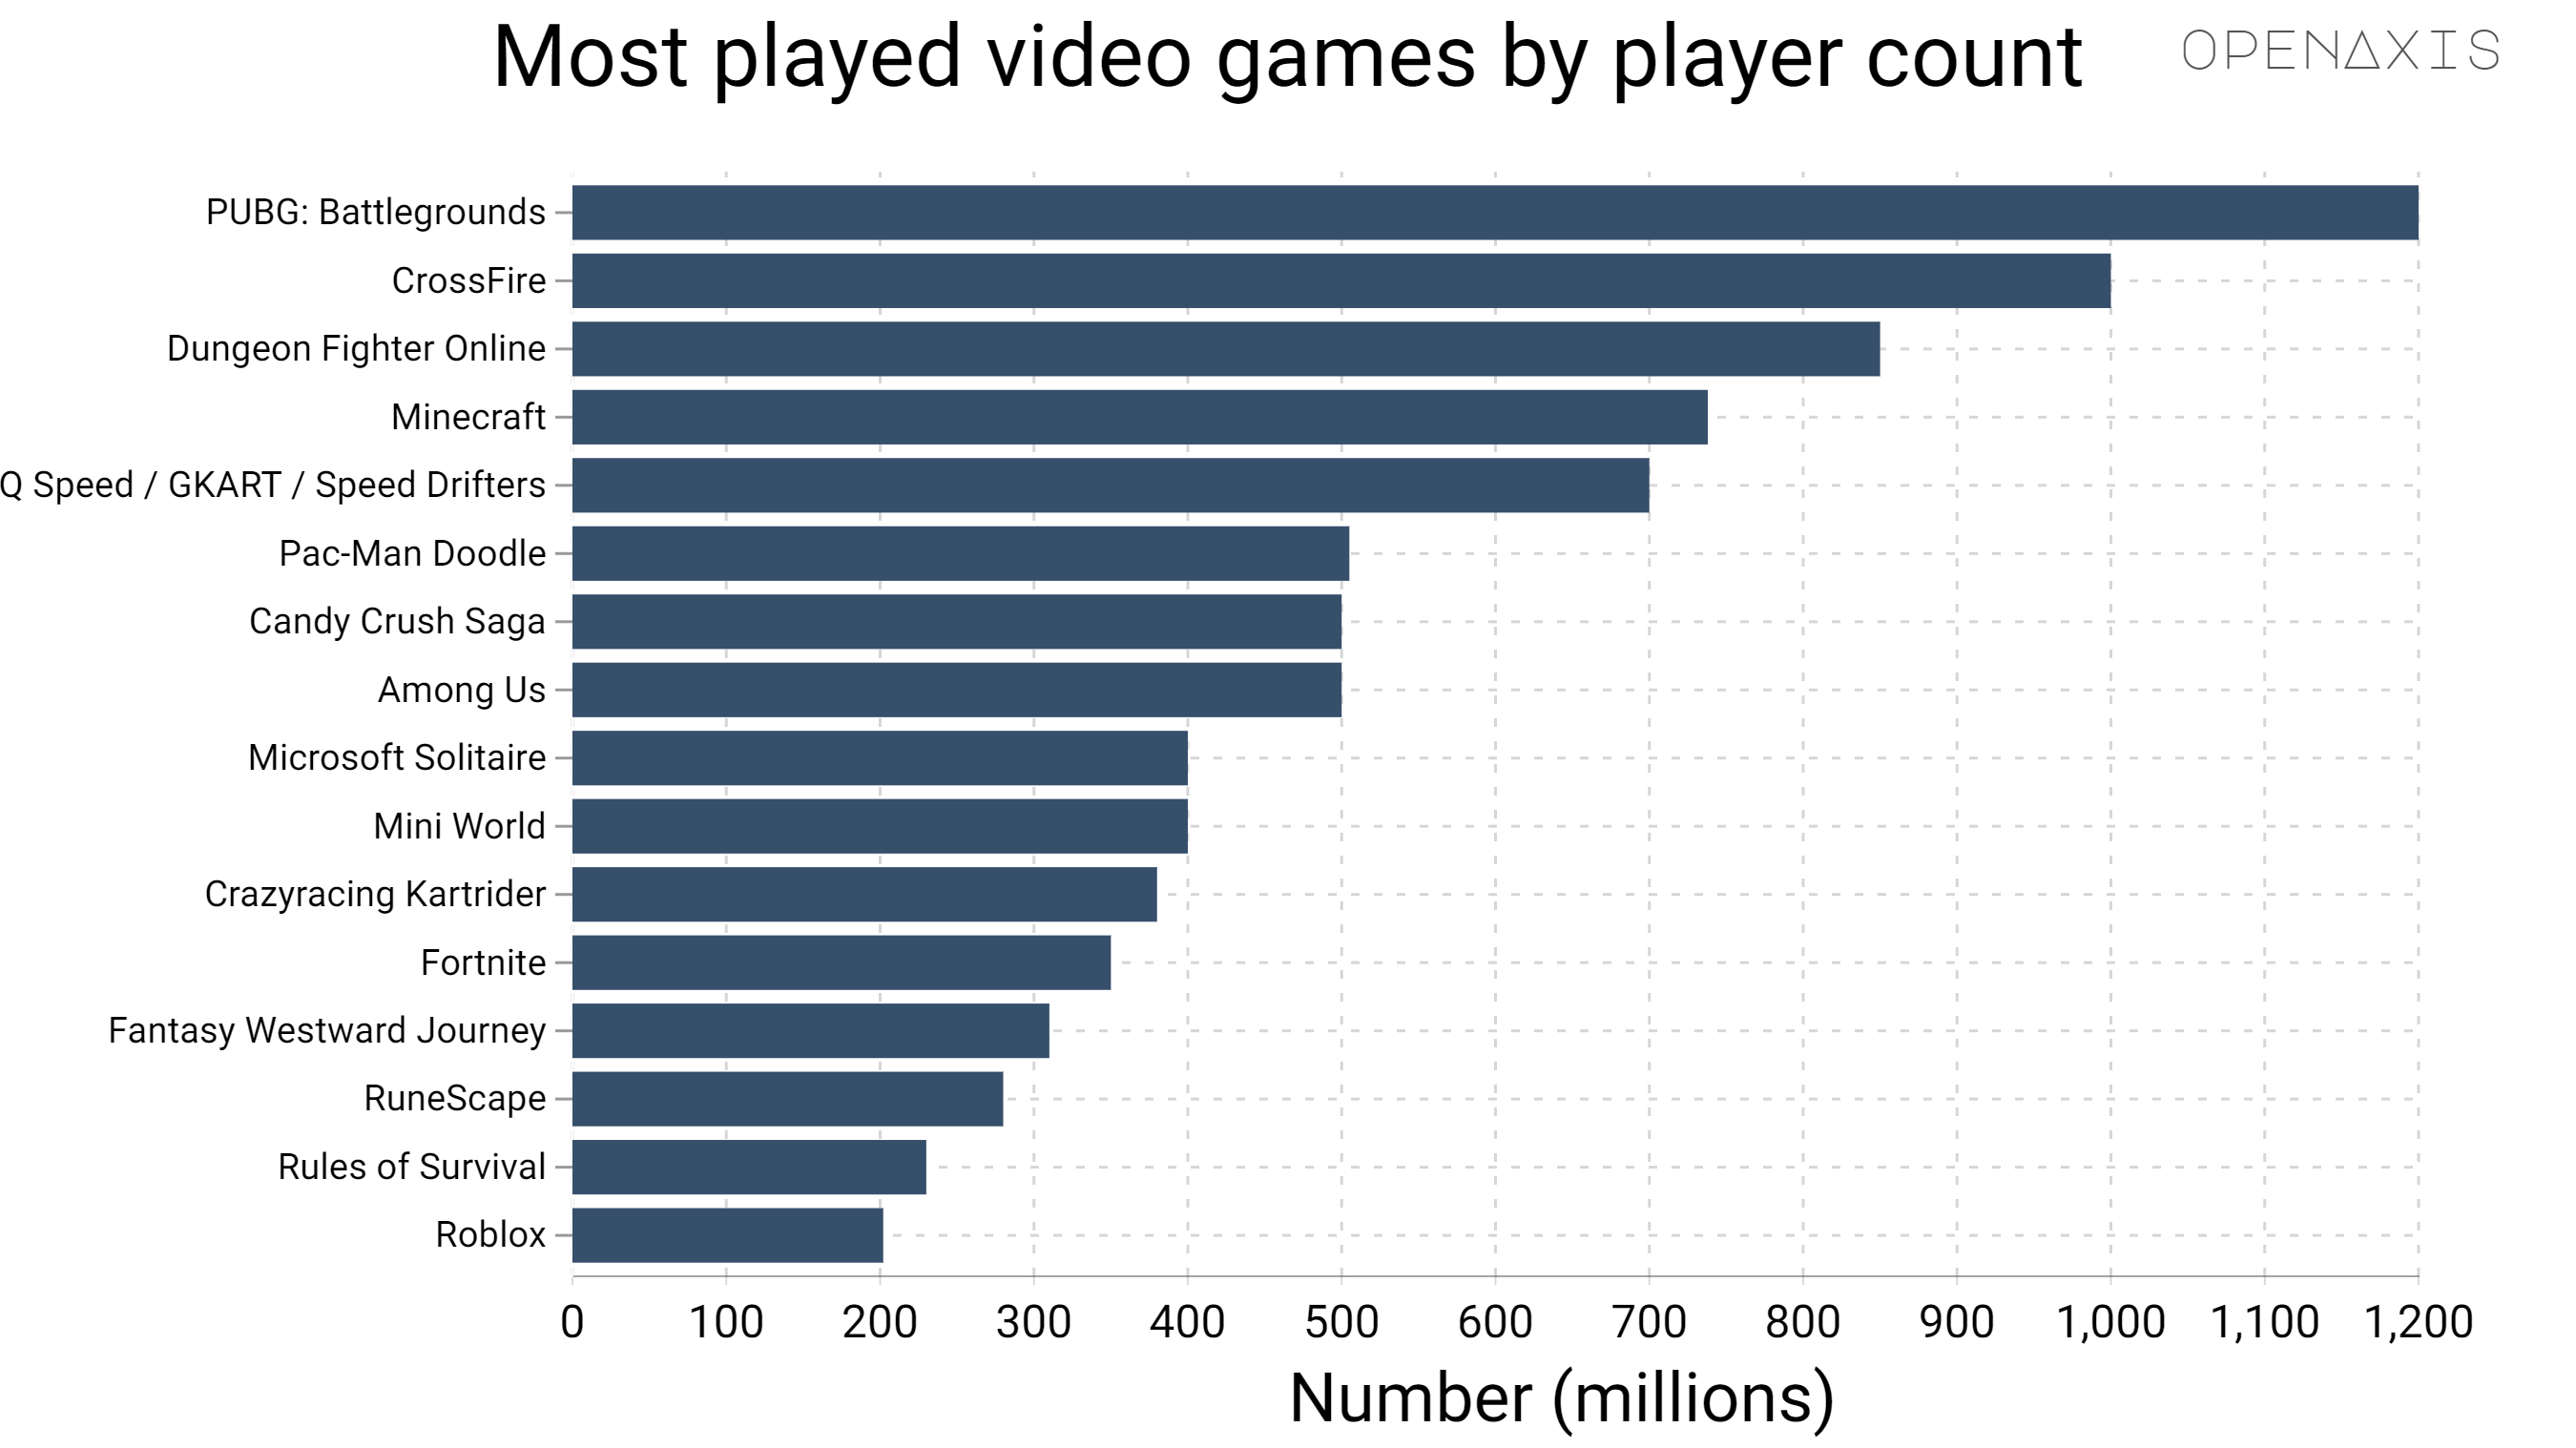 "Most played video games by player count"